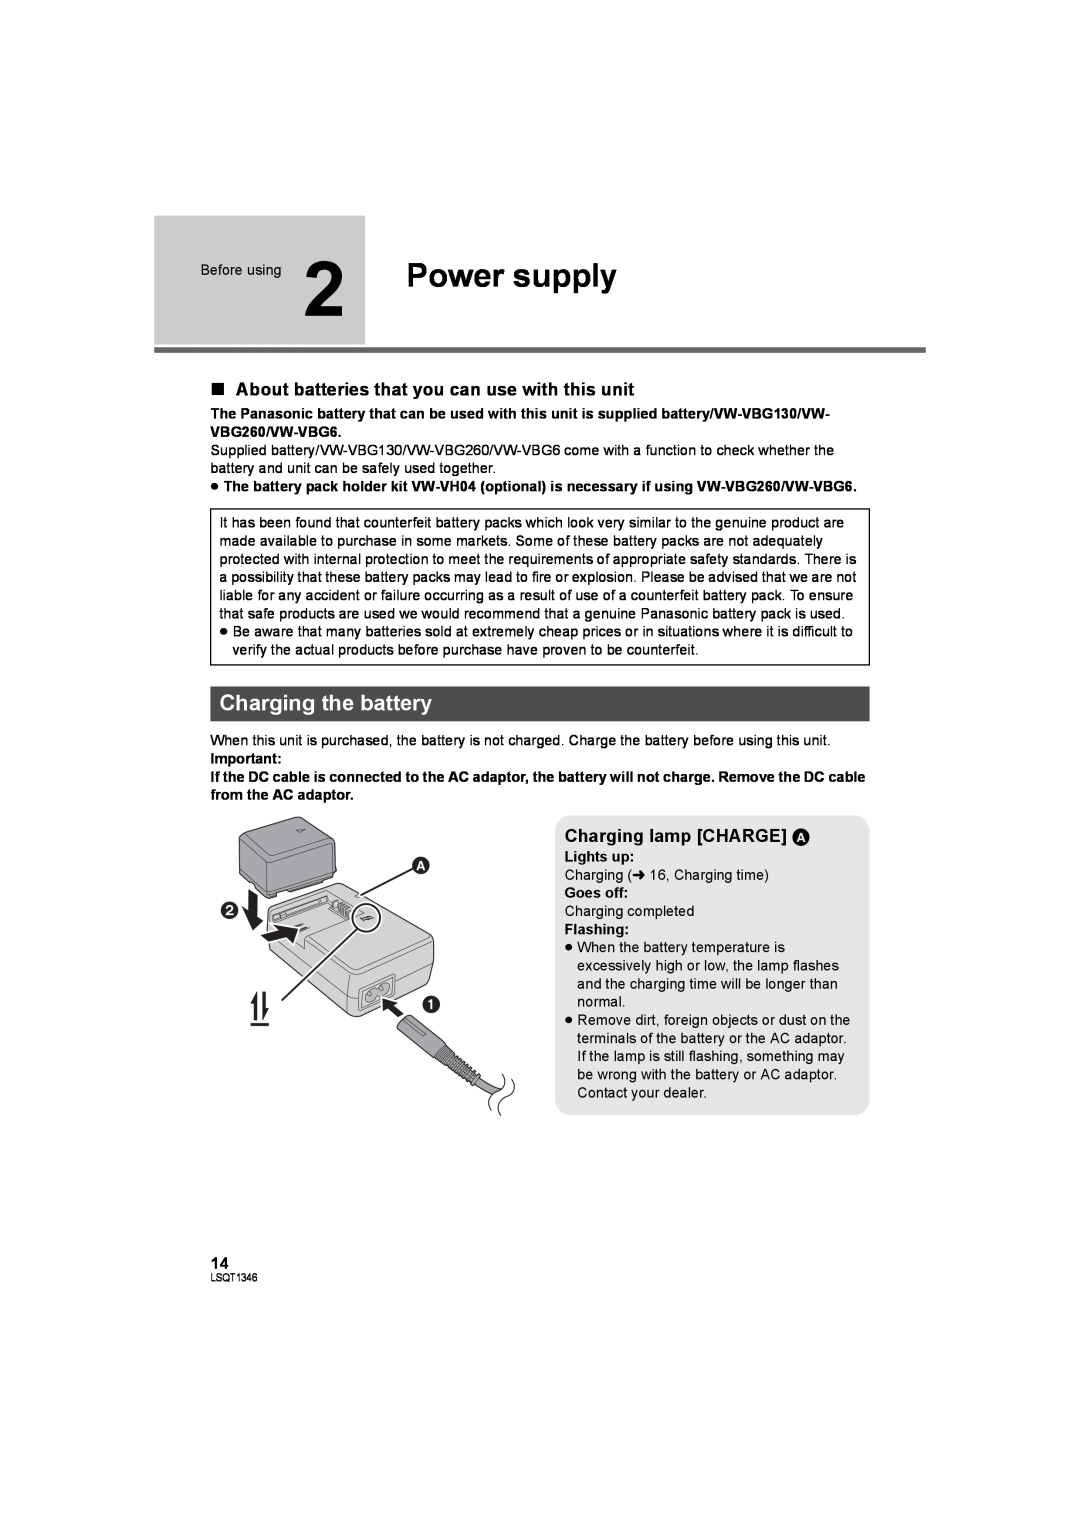 Panasonic SDR-H50 Power supply, Charging the battery, ∫ About batteries that you can use with this unit, Lights up 